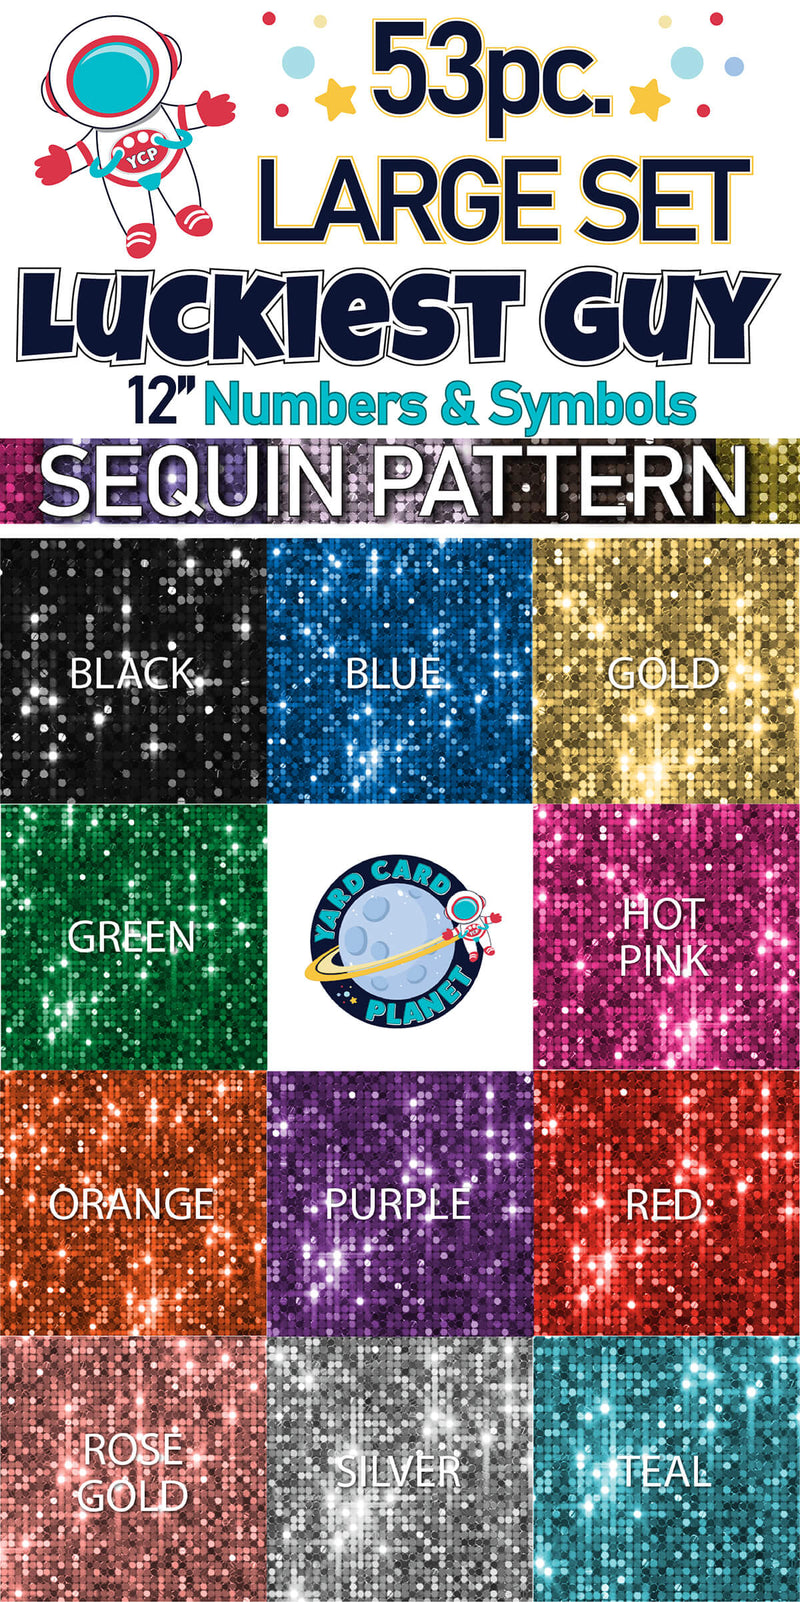 12" Luckiest Guy 53 pc. Numbers and Symbols Set in Sequin Pattern